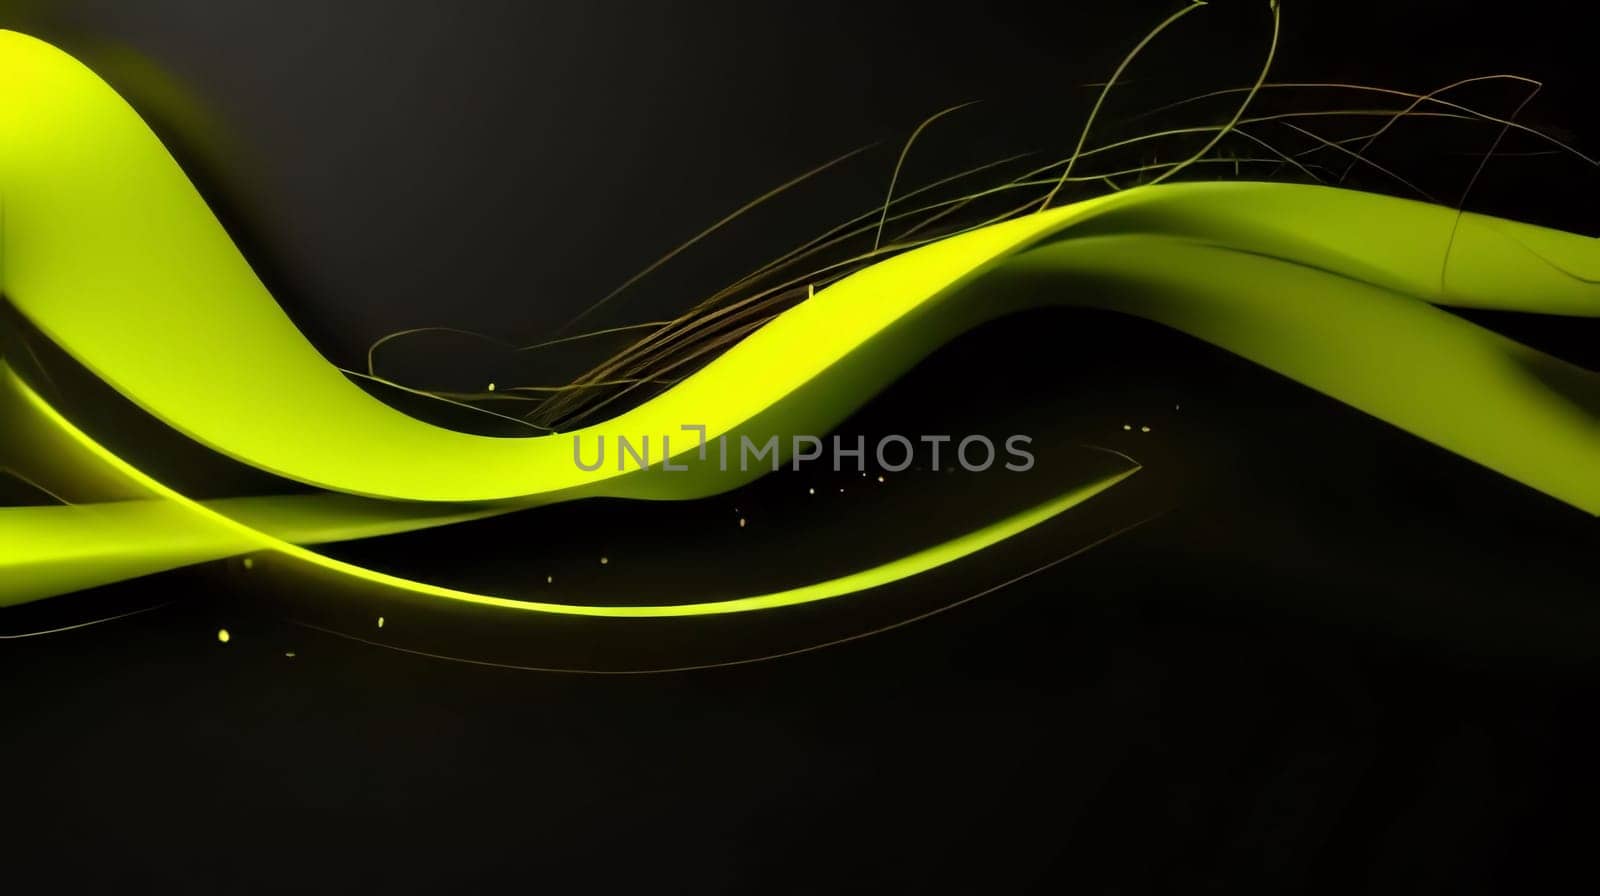 Abstract background design: abstract yellow waves on a black background. 3d render illustration